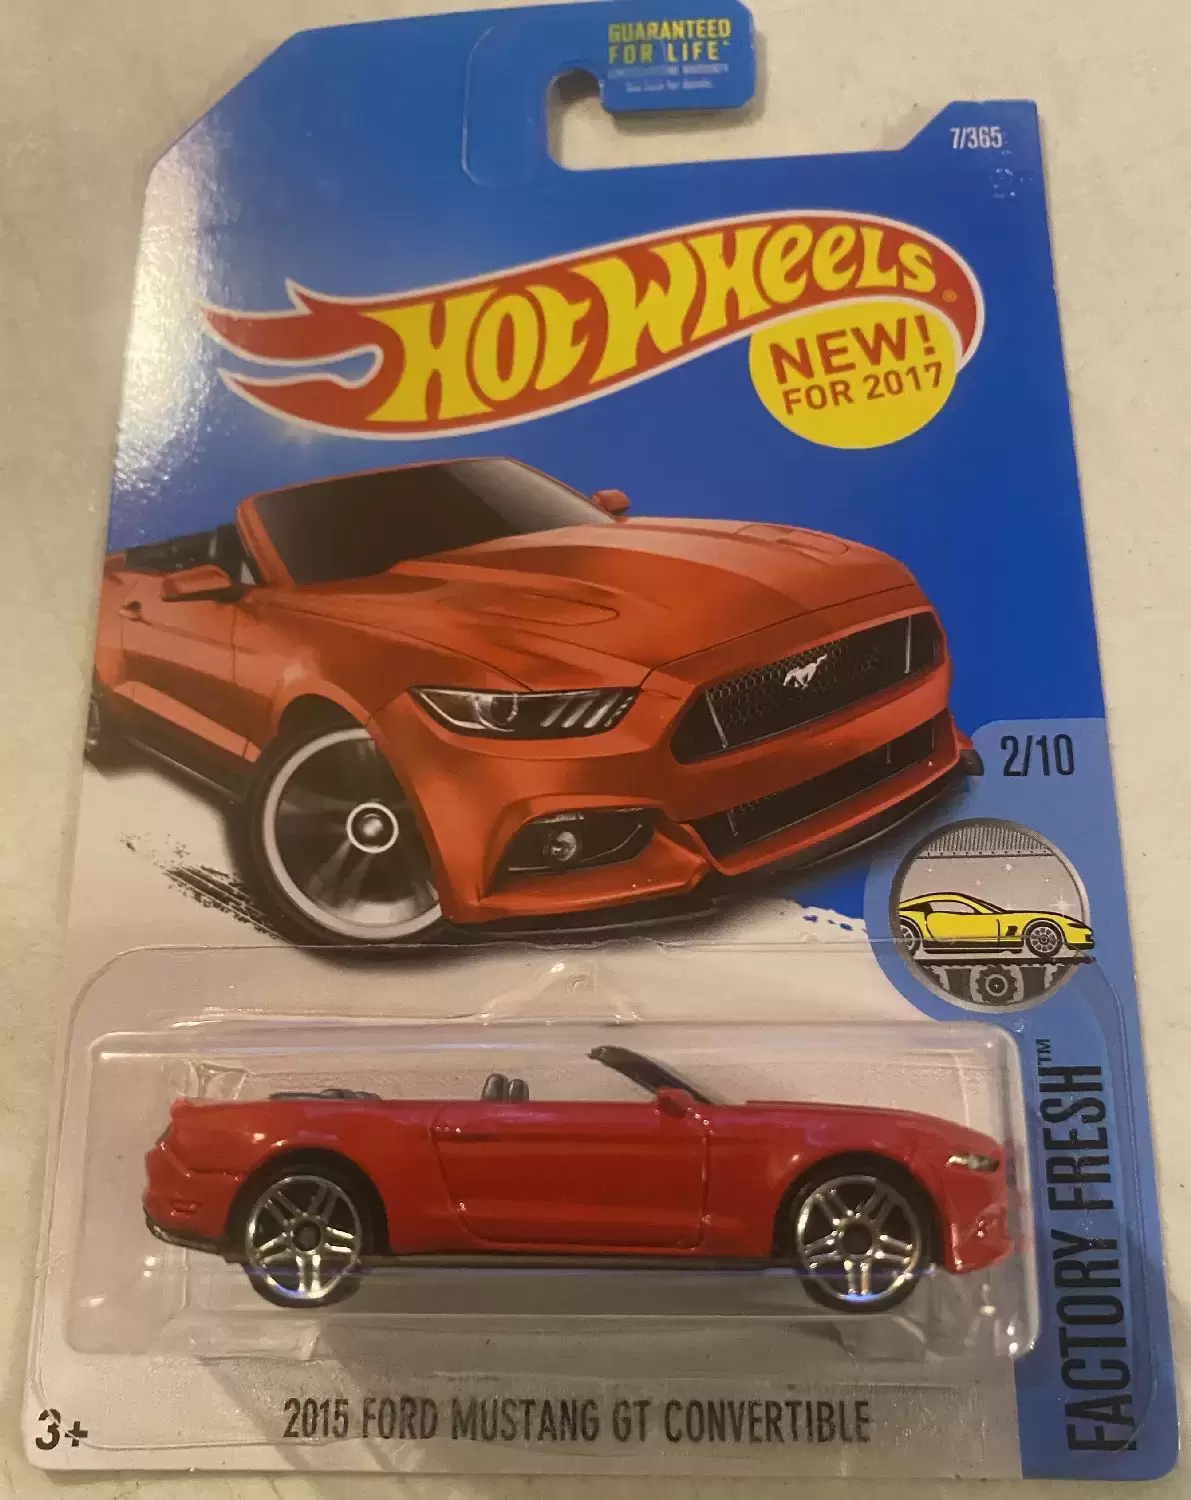 Hot Wheels Classiques - 2015 Ford Mustang GT Convertible (7/365) - Factory Fresh 2/10